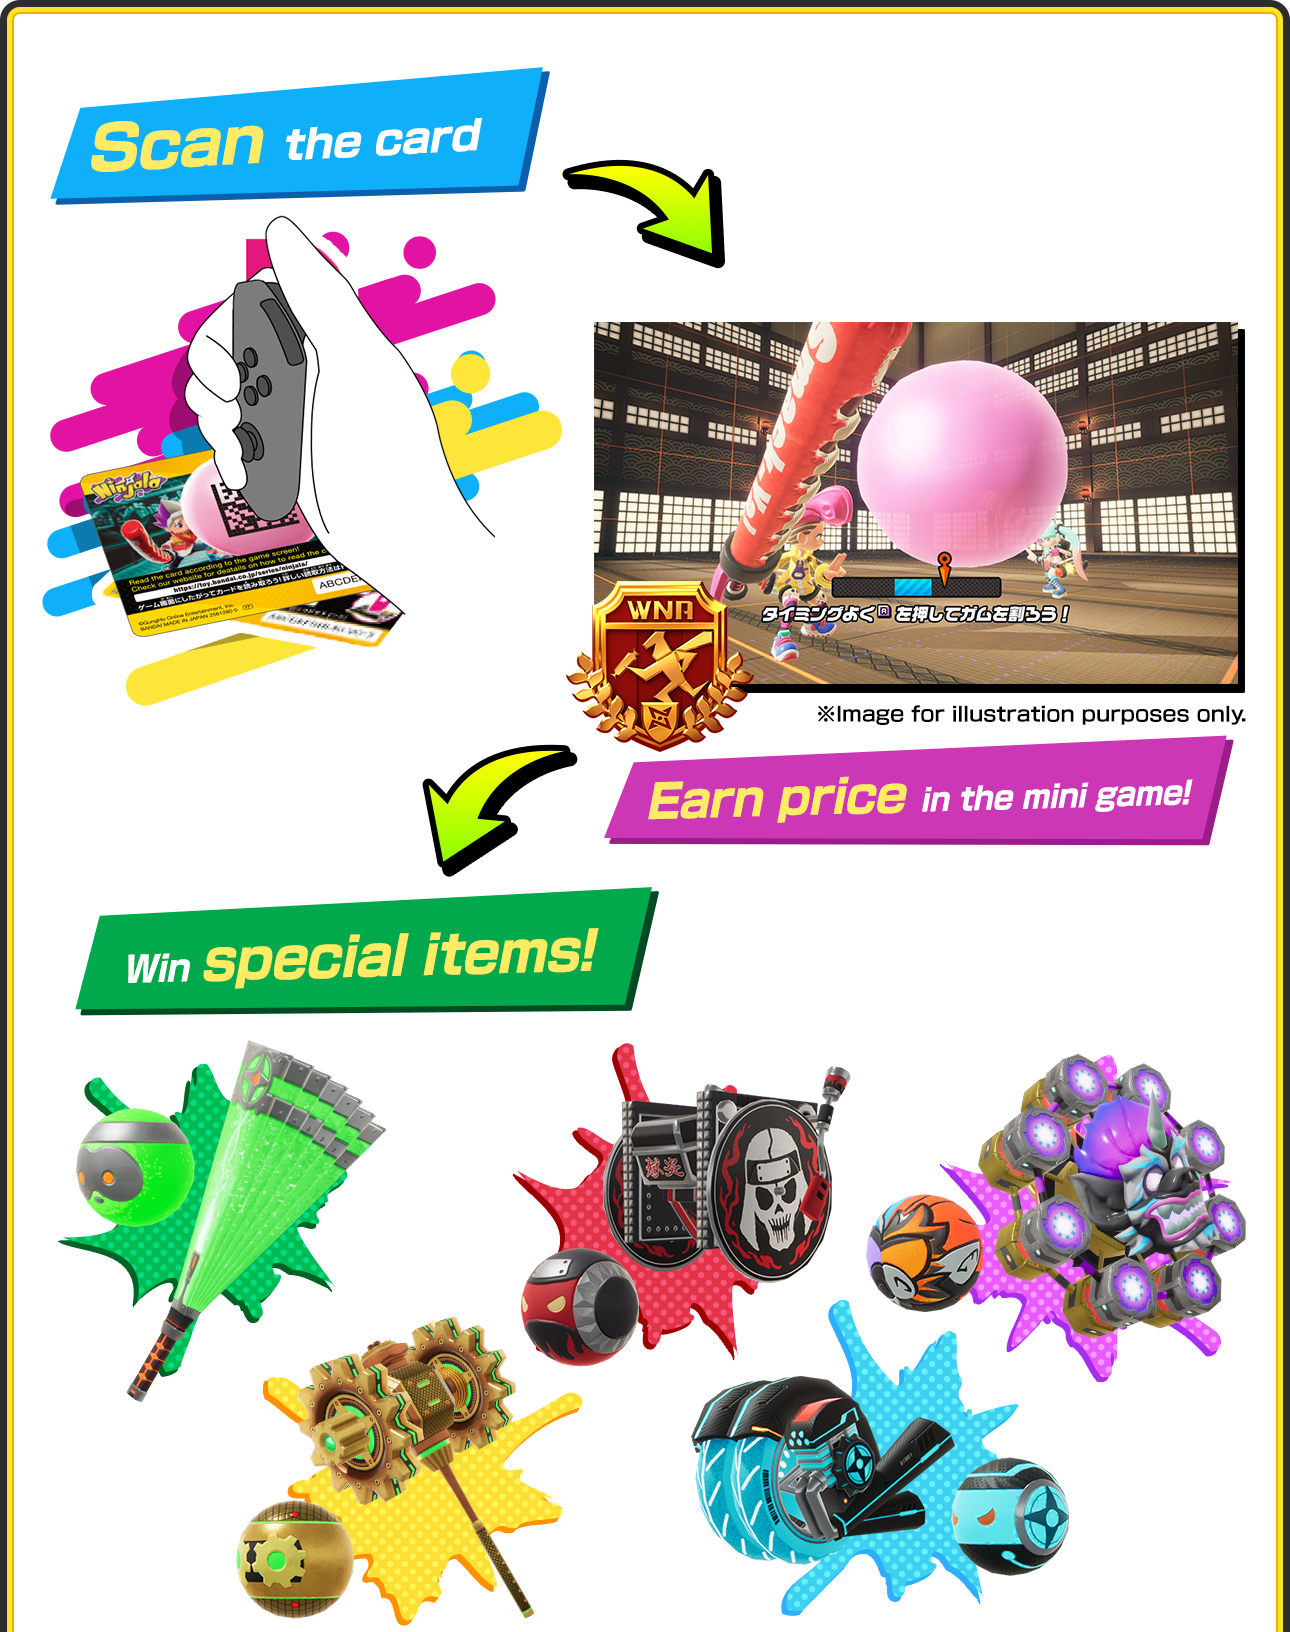 Scan the card→Earn price in the mini game!→Win spexial items!